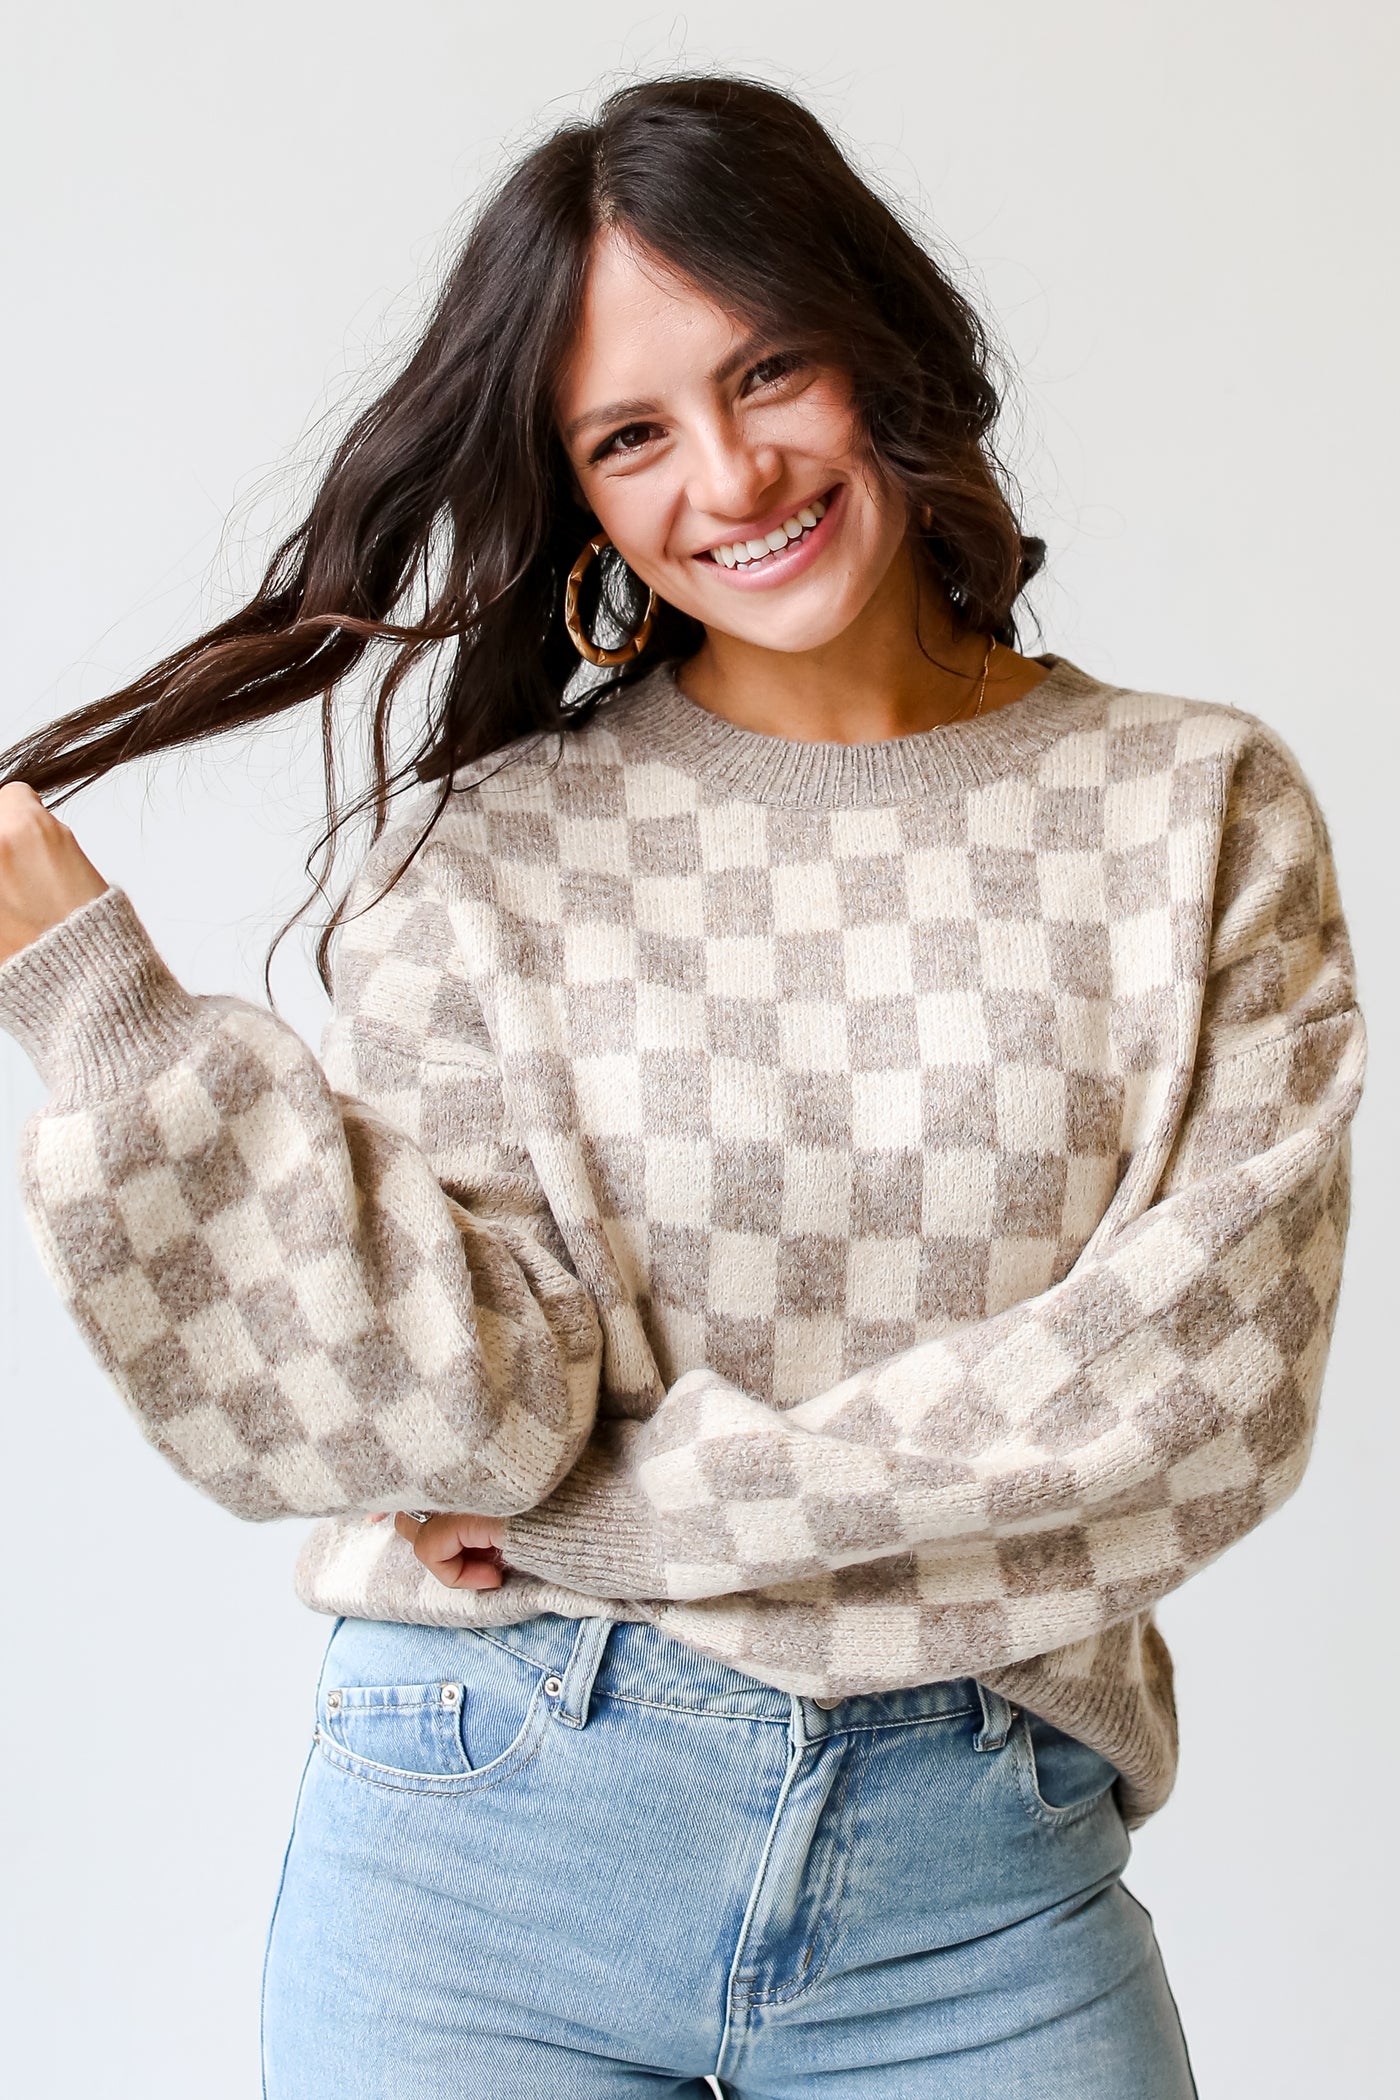 dress up model wearing a taupe Checkered Sweater